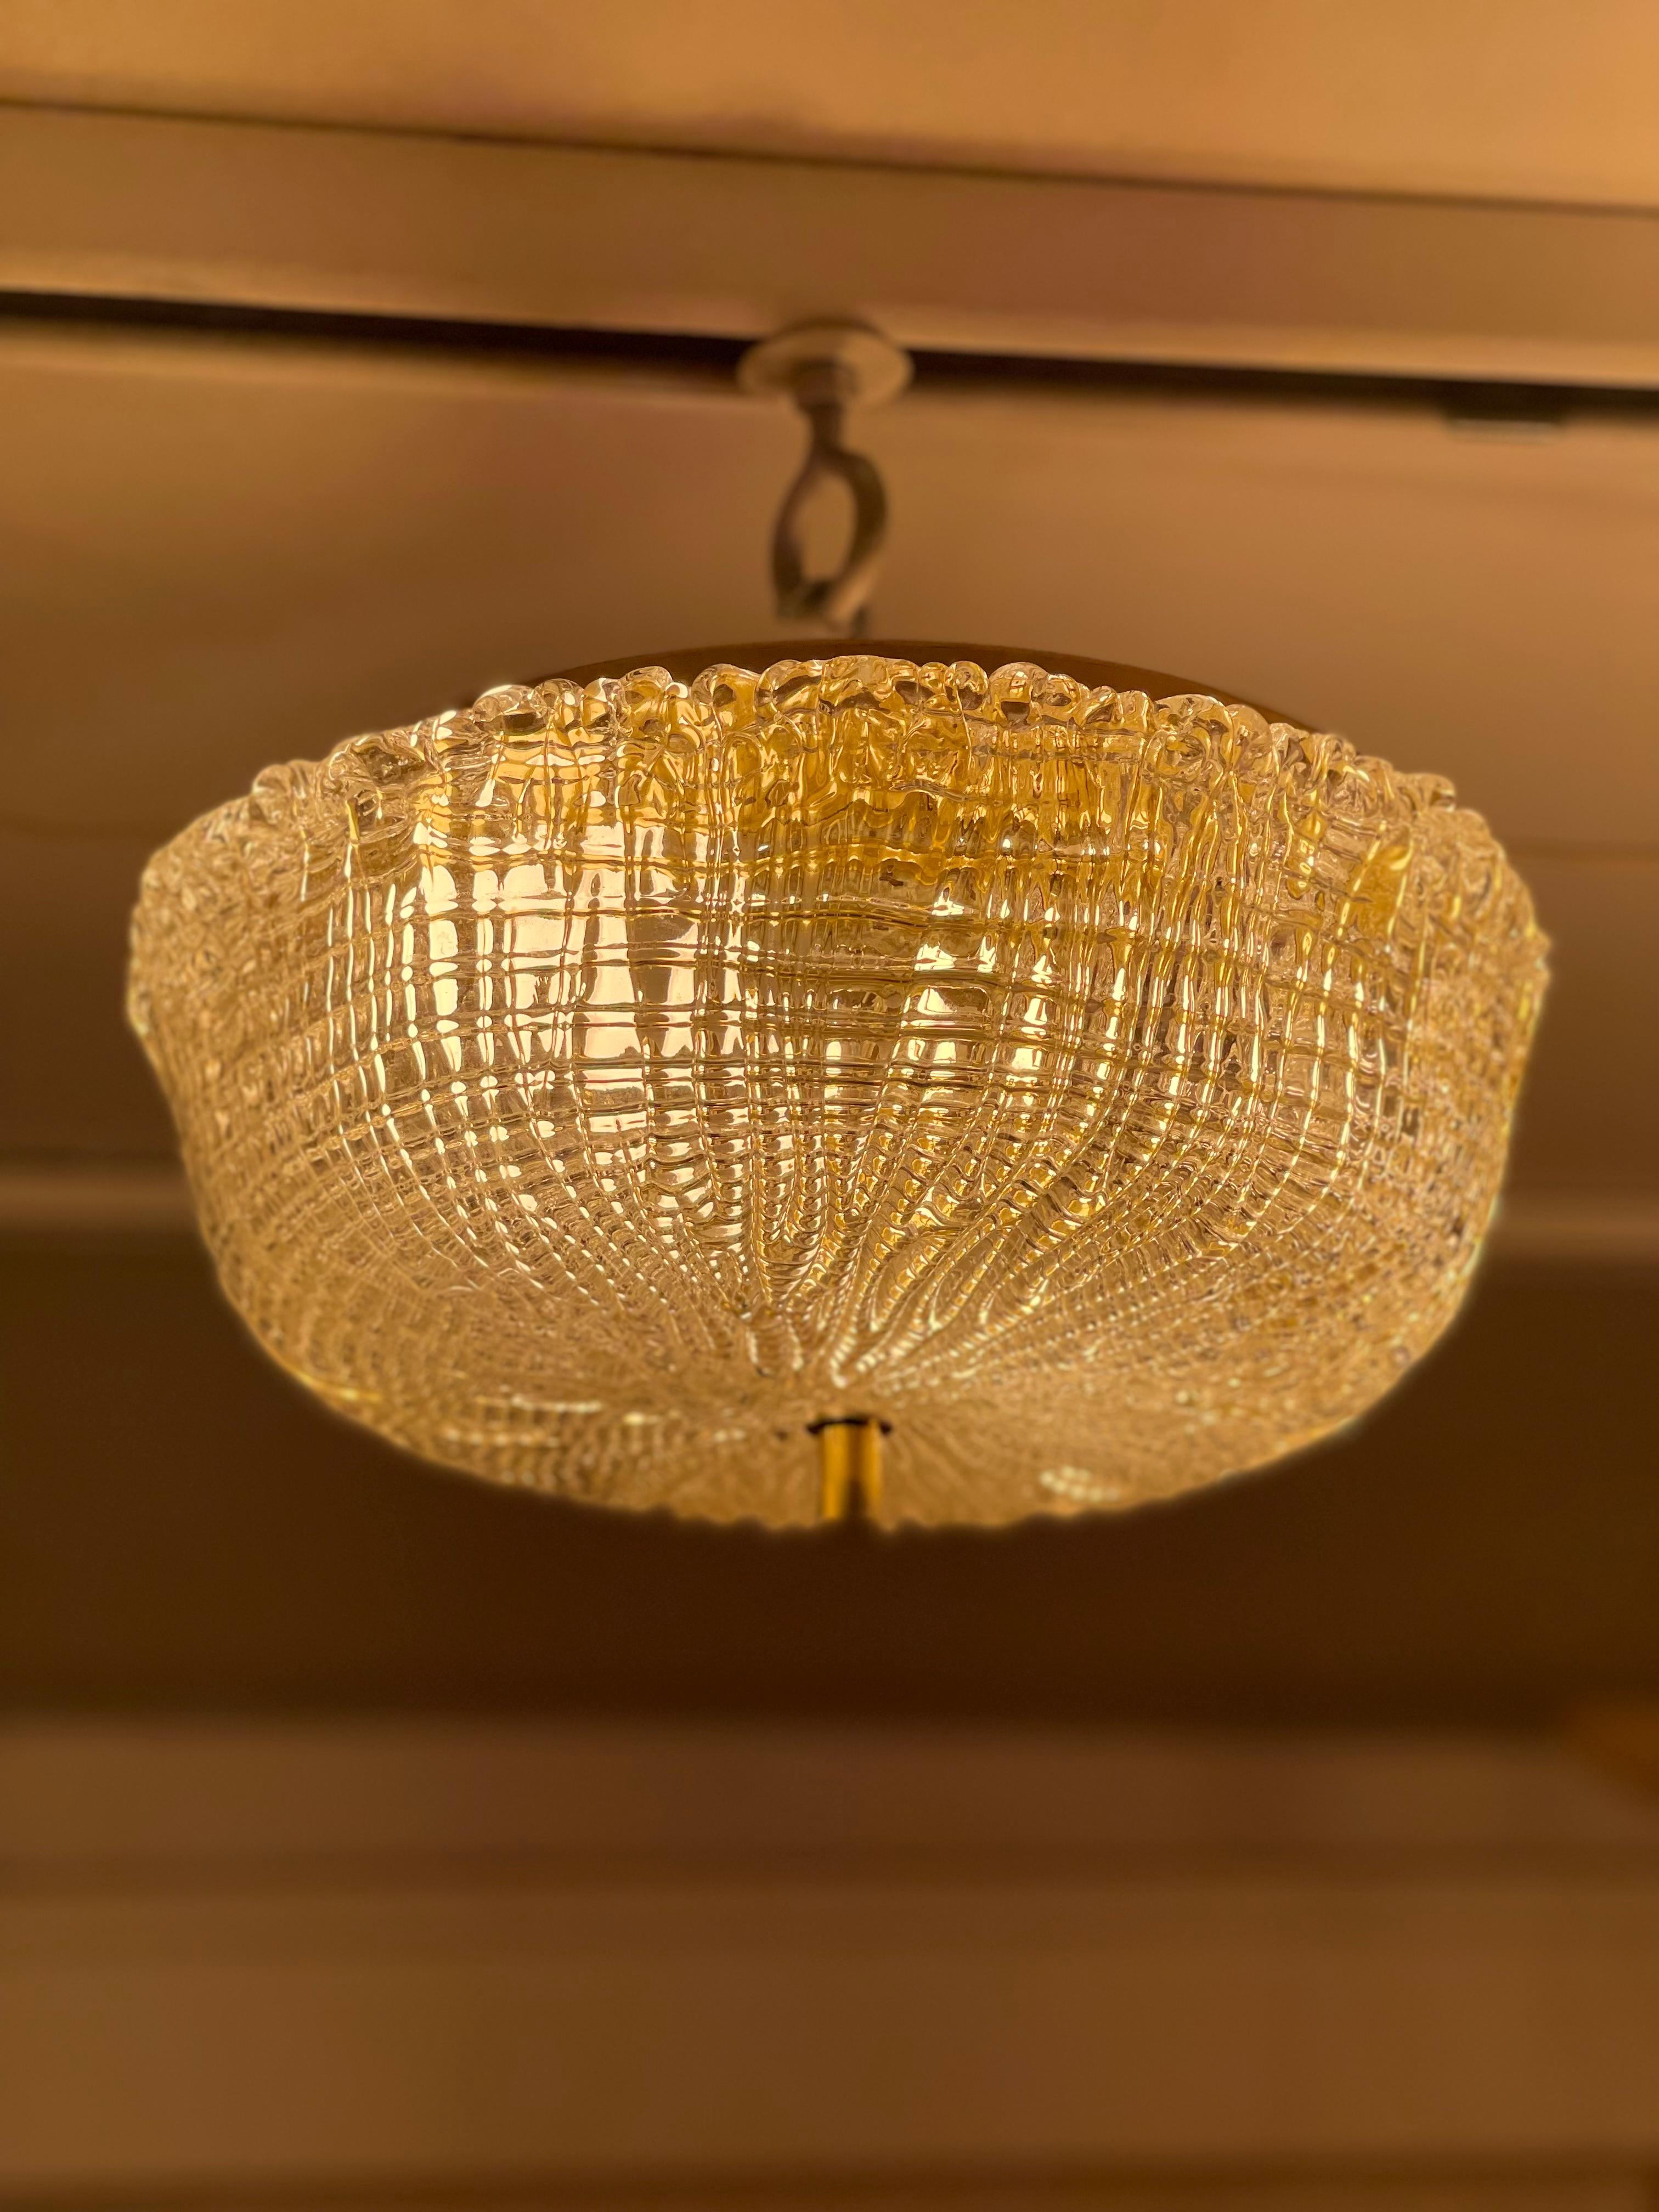 Kosta Boda Glass Light Fixtures In Good Condition For Sale In New York, NY